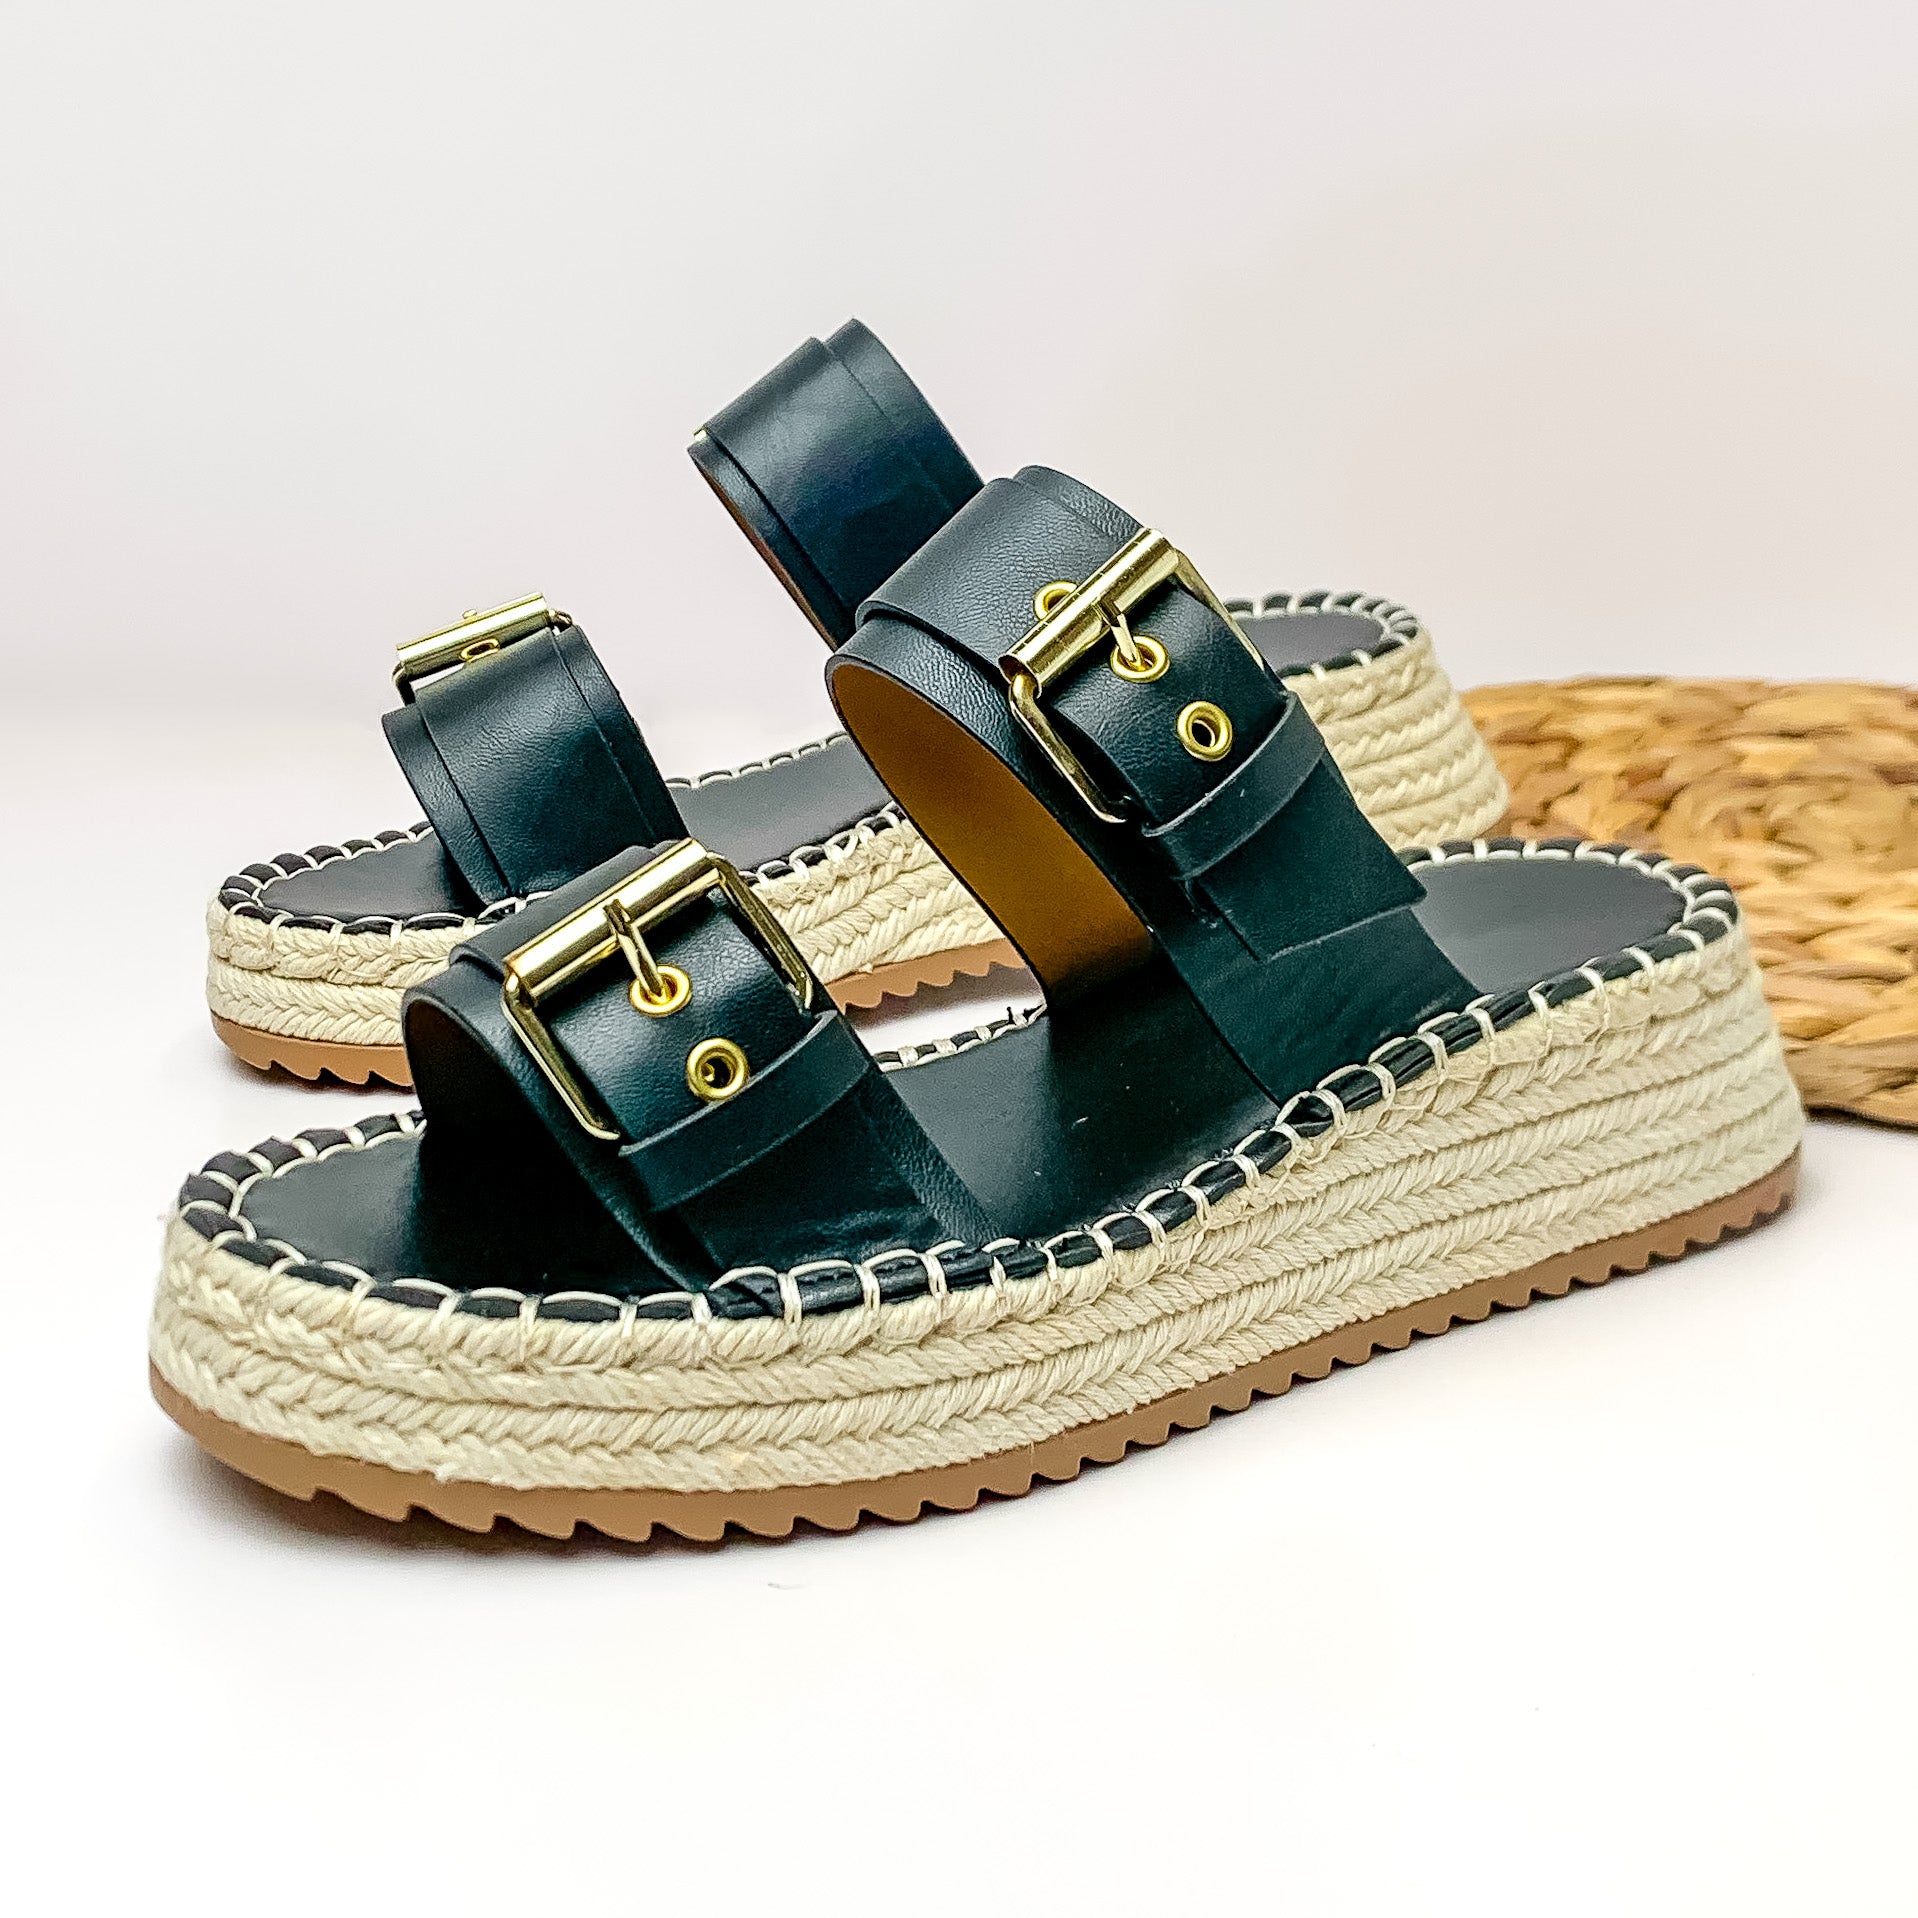 Yacht Trip Two Strap Slide On Espadrille Platform Sandals with Gold Buckles in Black - Giddy Up Glamour Boutique